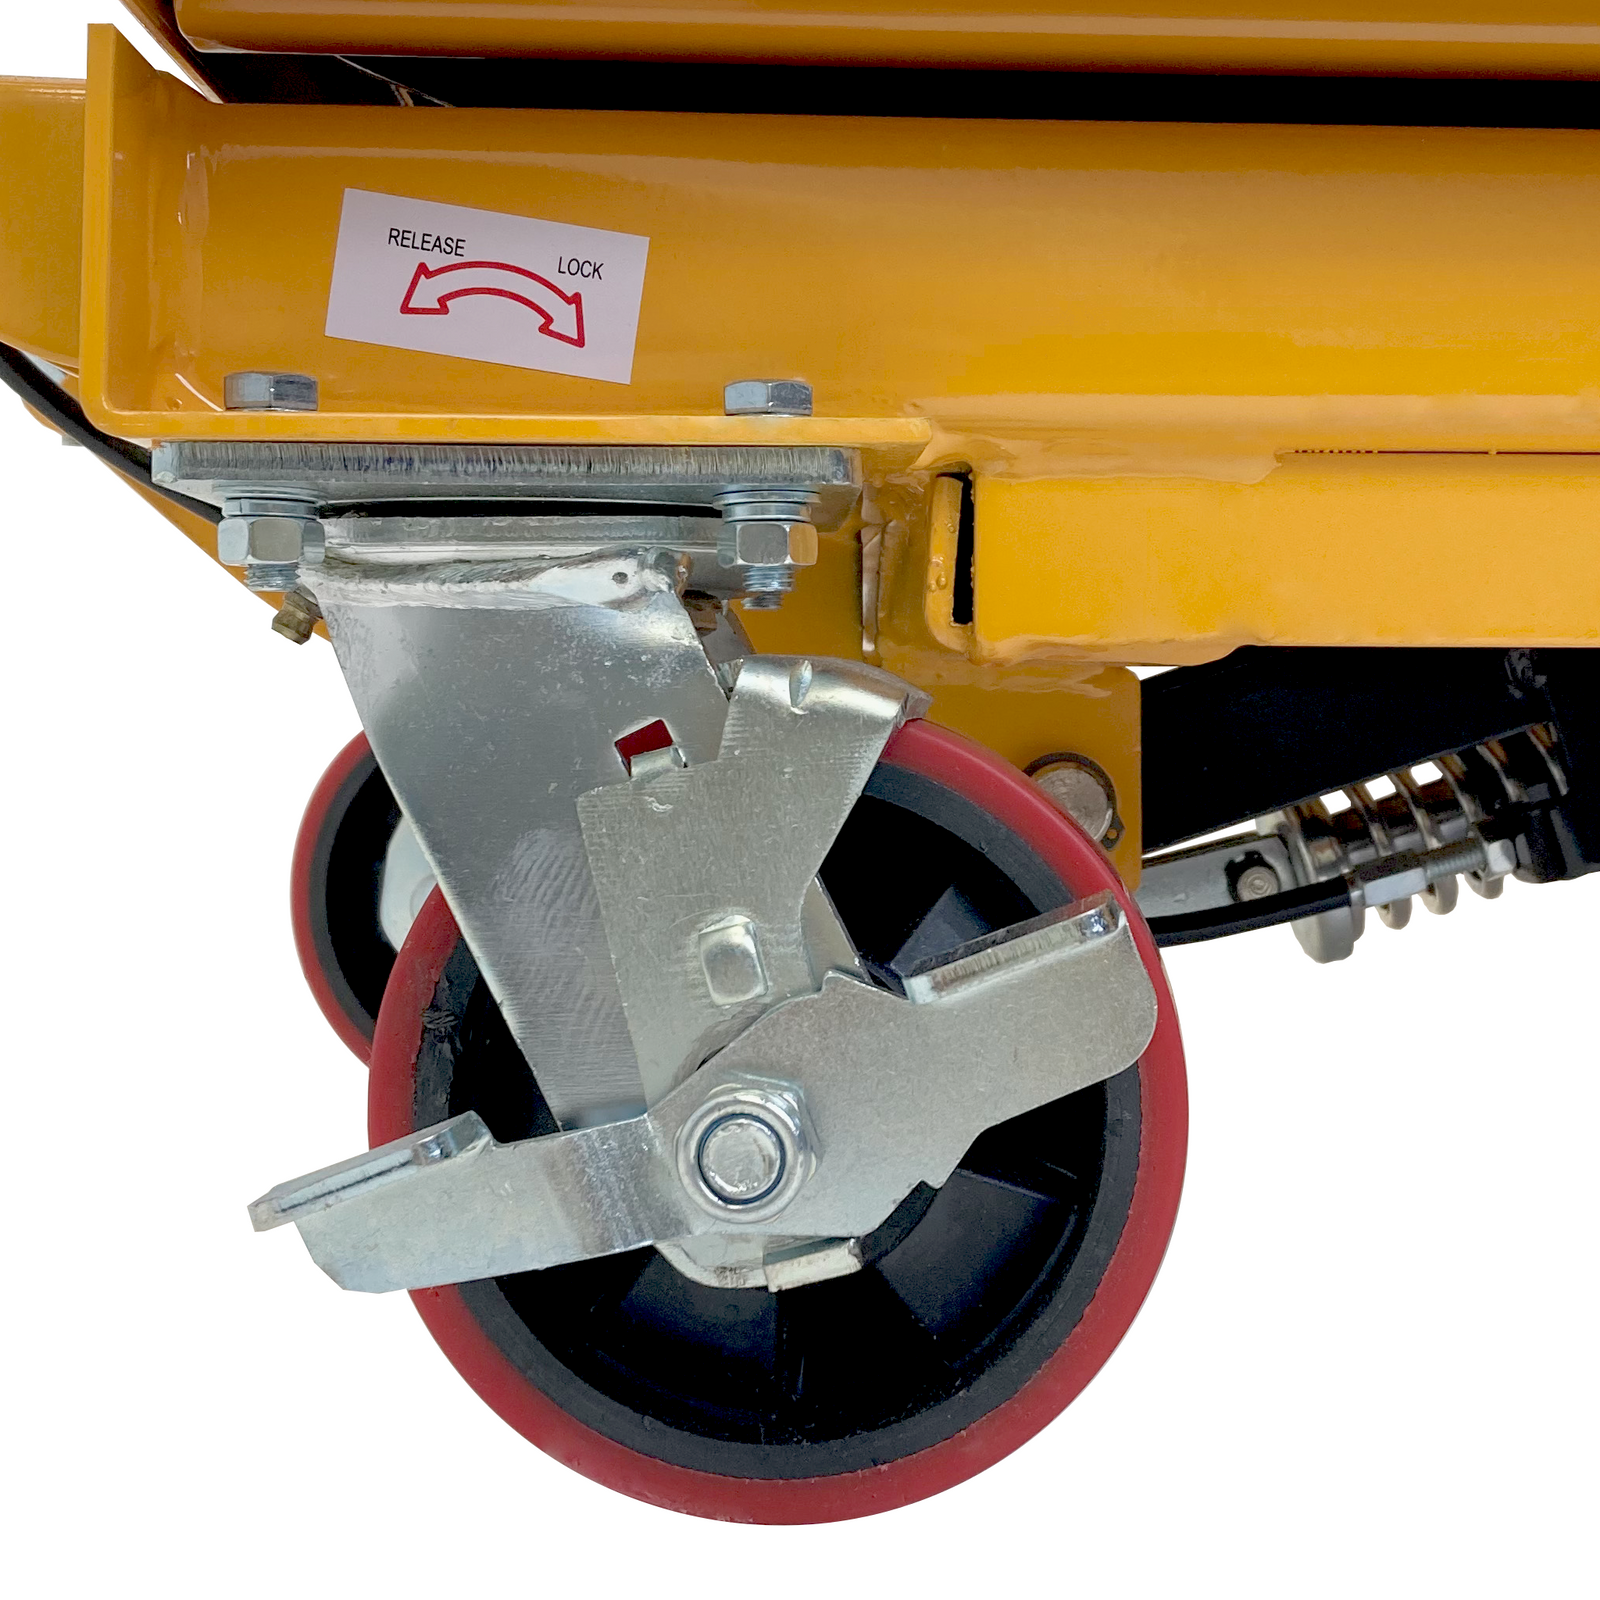 Close up of one of the rugged red back wheels with brakes of the mobile scissor lift table for 330 pounds. Sticker describing the position for the brake to be released and to be locked.